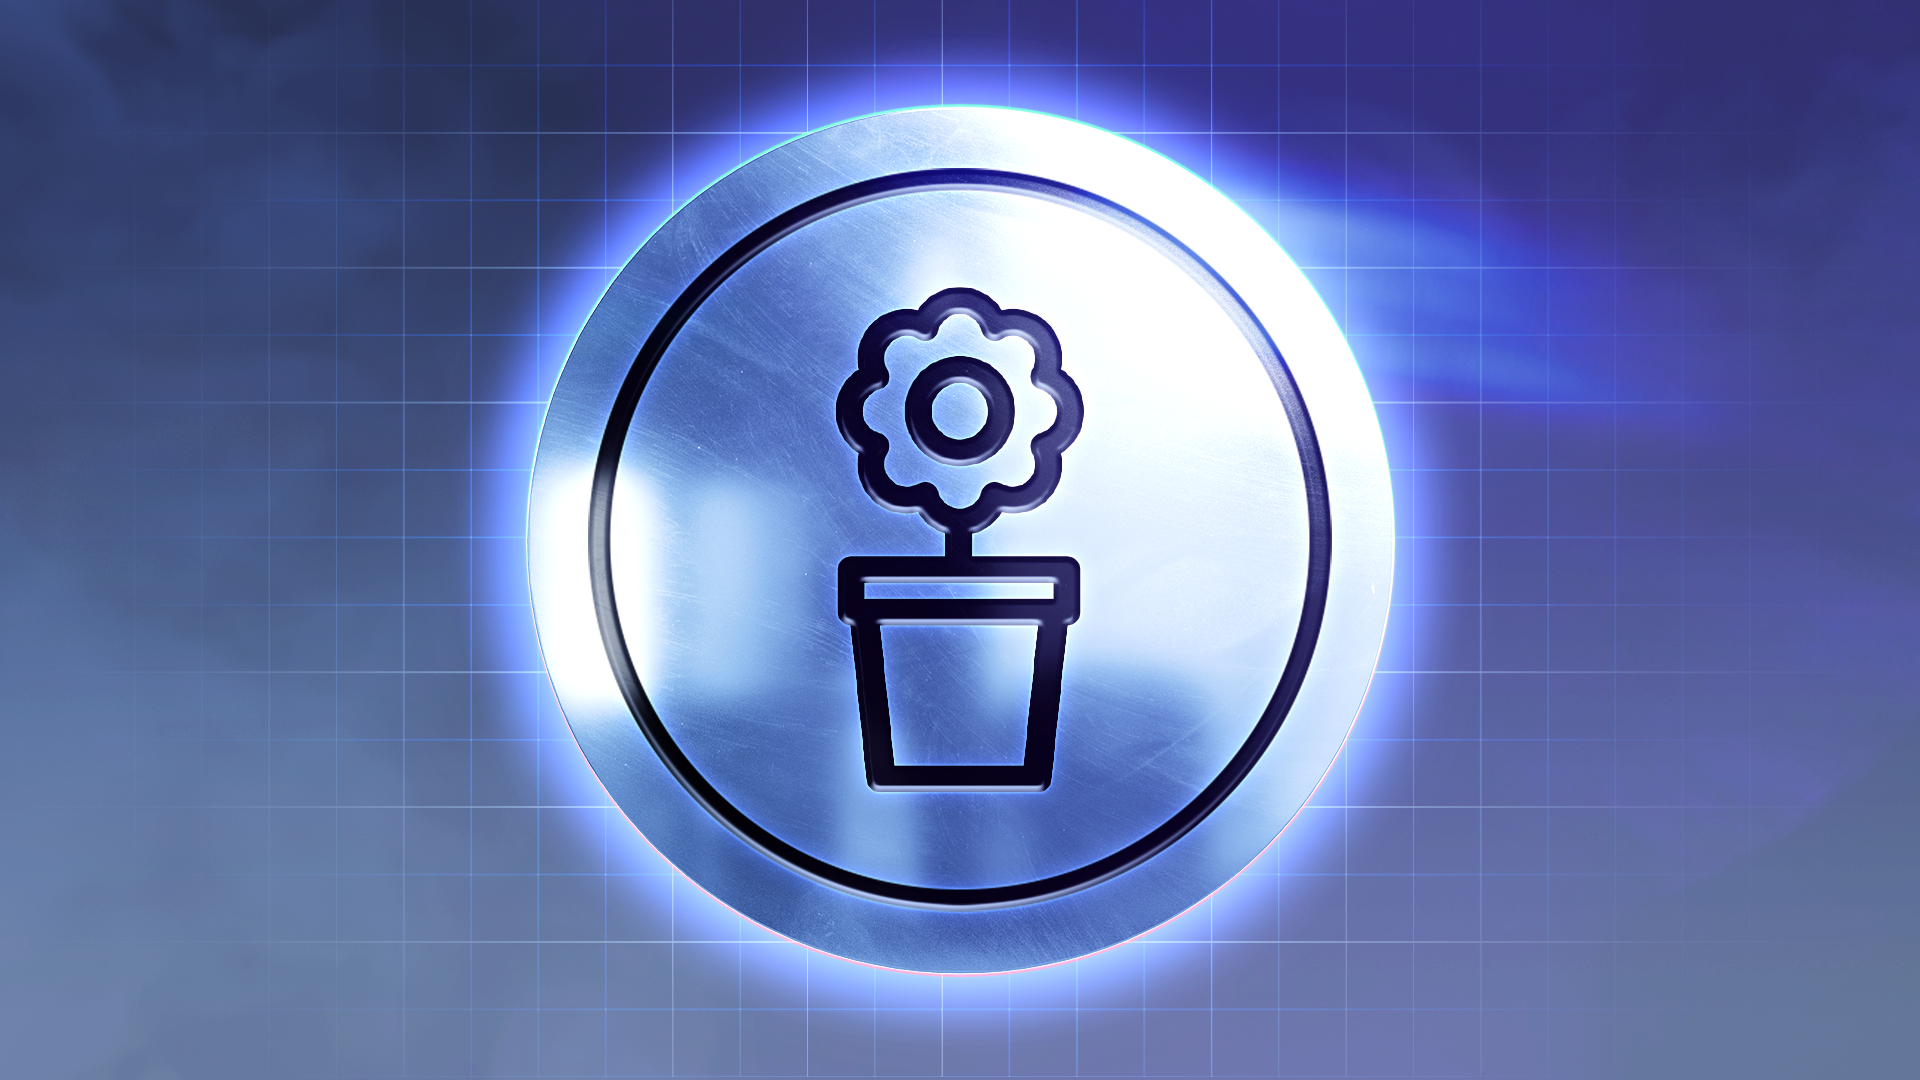 Icon for Fatal Florist